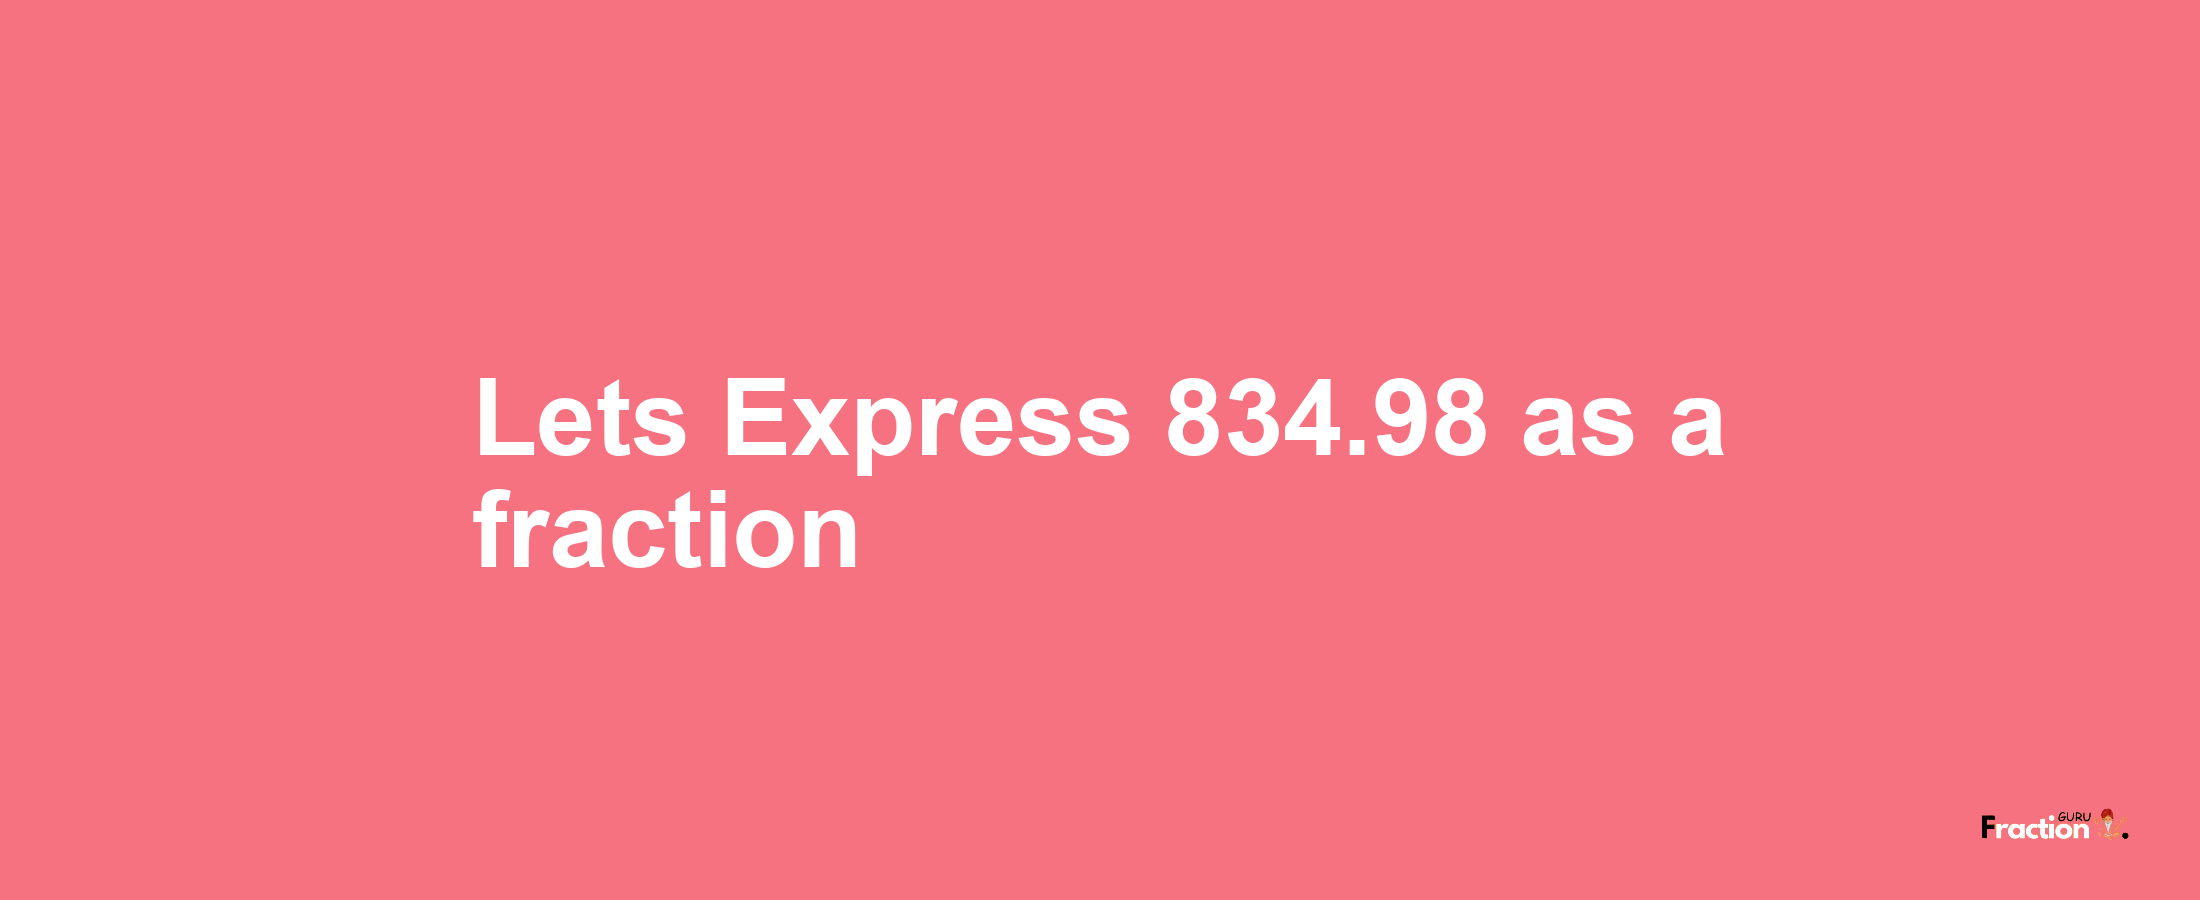 Lets Express 834.98 as afraction